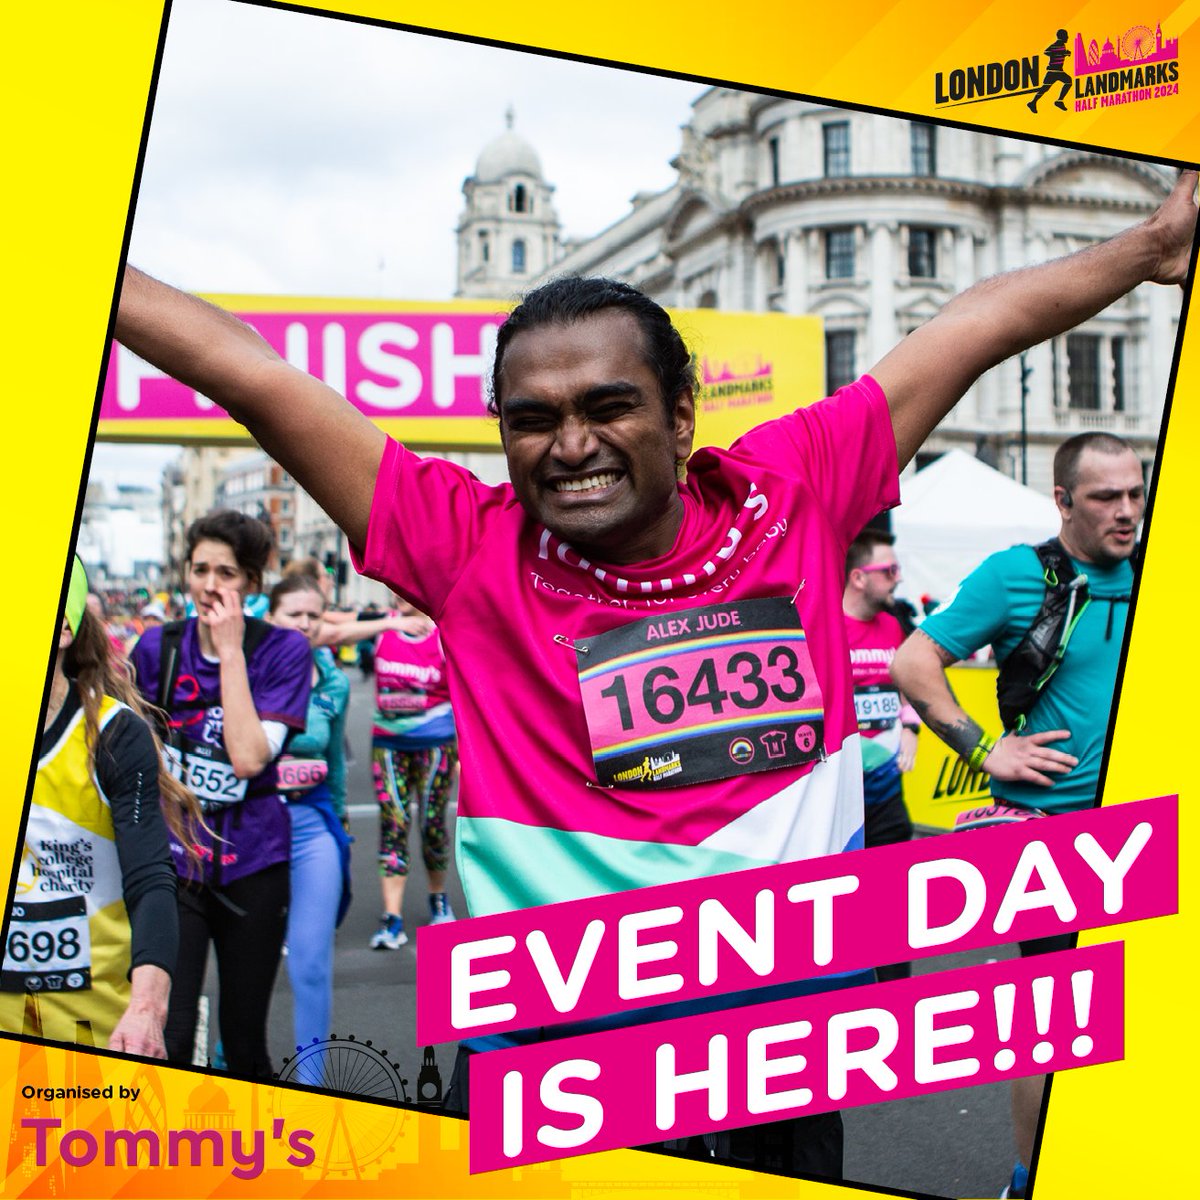 Race day is here💛 We want to wish all our LLHM runners the best of luck. The hard work is done – it’s time to put your training to the test, soak up the incredible support, and enjoy the amazing race day atmosphere! See you on the Start Line! #LLHM2024